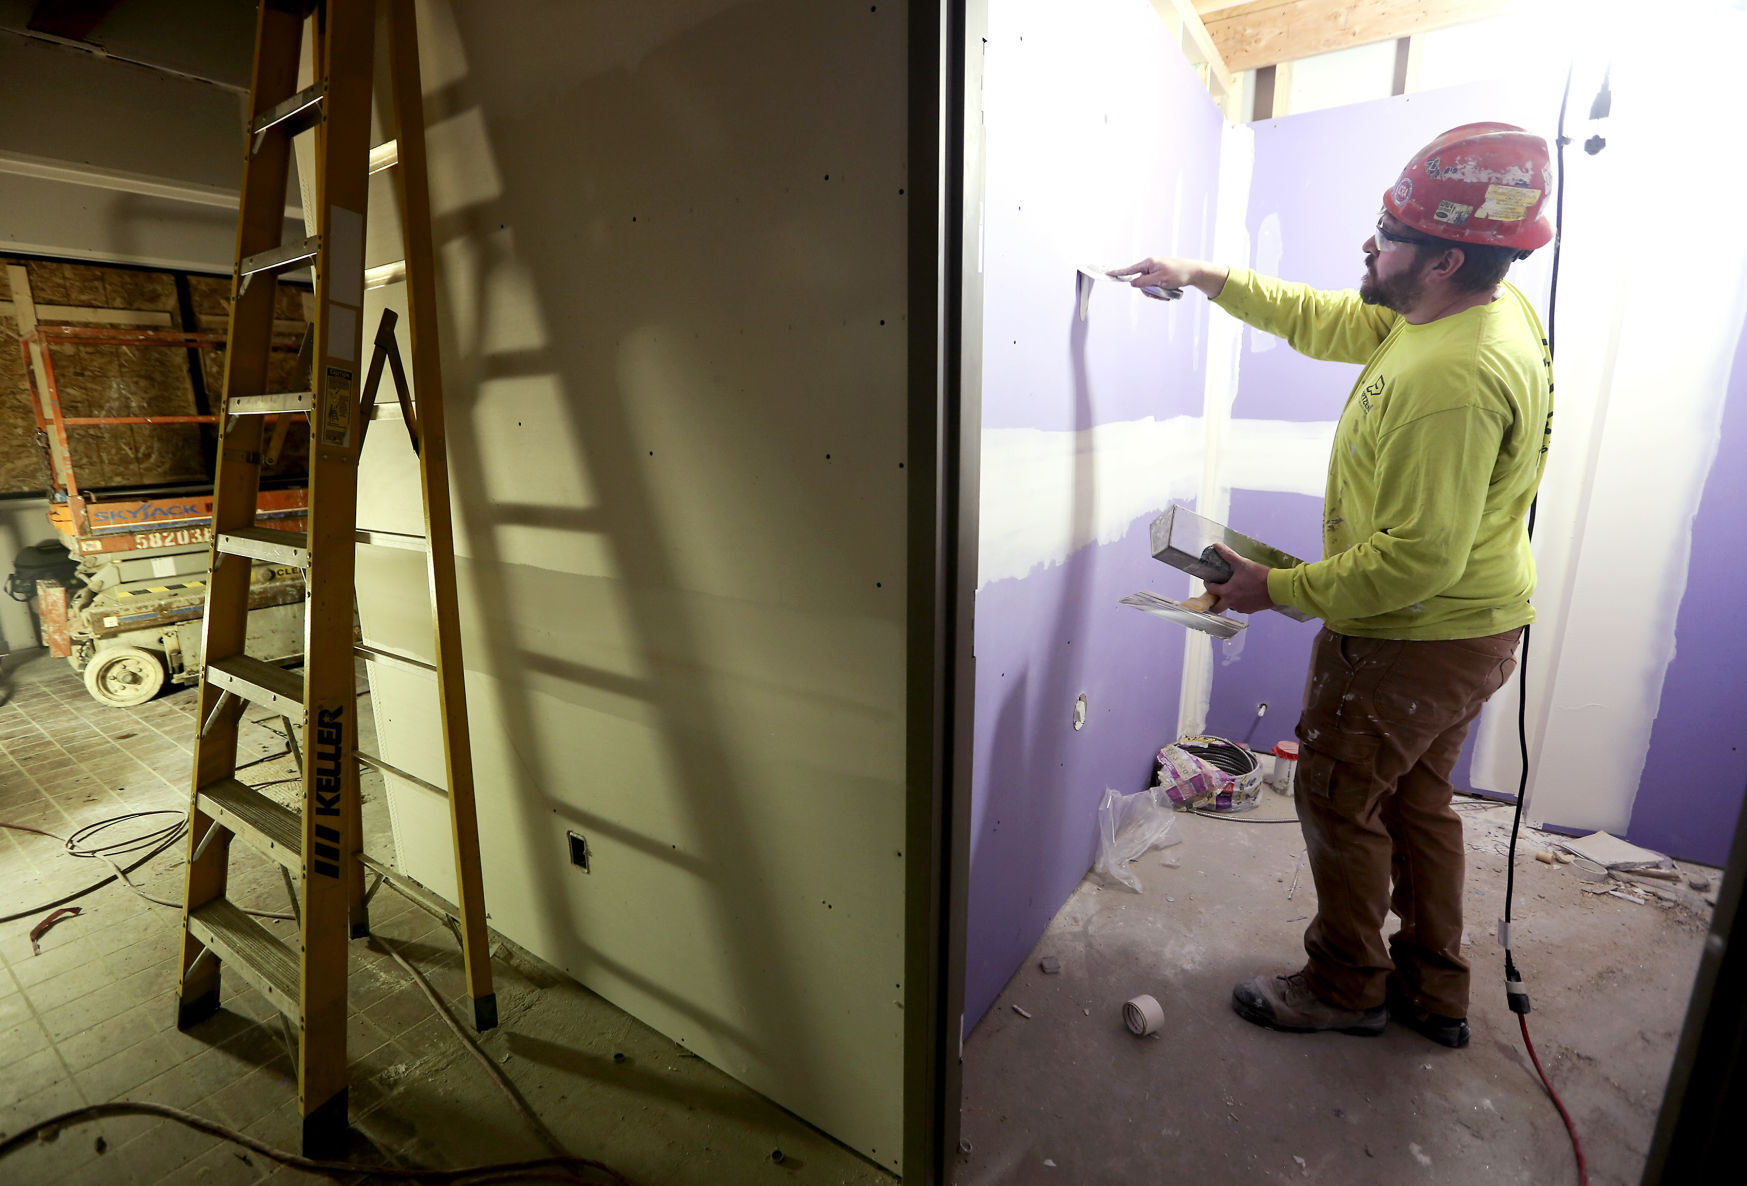 Dominic Watters, with Portzen Construction, works on a new bathroom as part of a renovation at Family Mart in Dubuque on Monday, Jan. 25, 2021. PHOTO CREDIT: NICKI KOHL